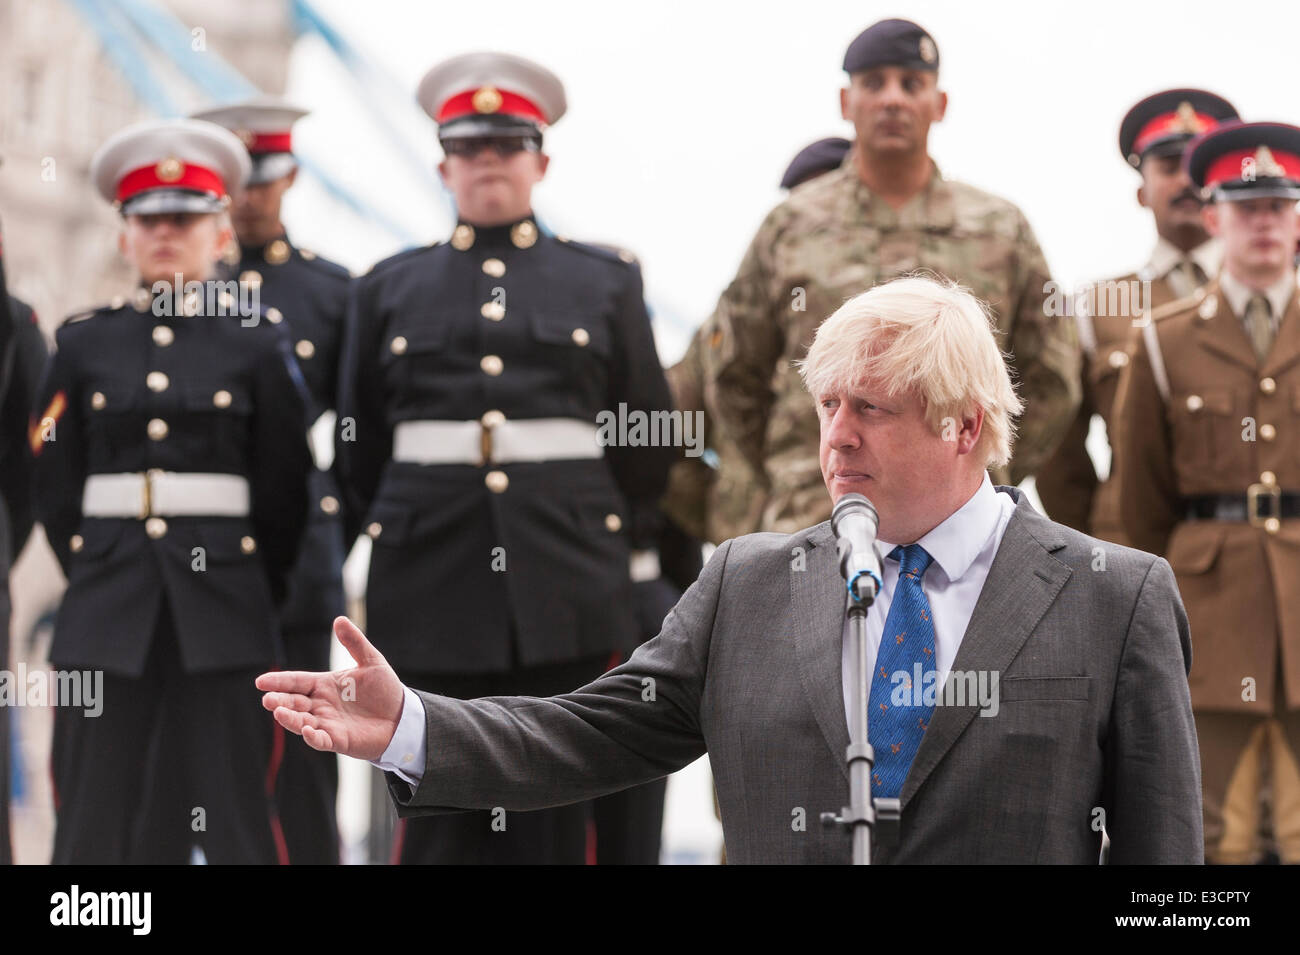 City Hall, London, UK, 23 June 2014.  Members of the British Armed Forces join the Mayor of London and London Assembly for a flag raising ceremony to honour the bravery and commitment of service personnel past and present. Credit:  Stephen Chung/Alamy Live News Stock Photo